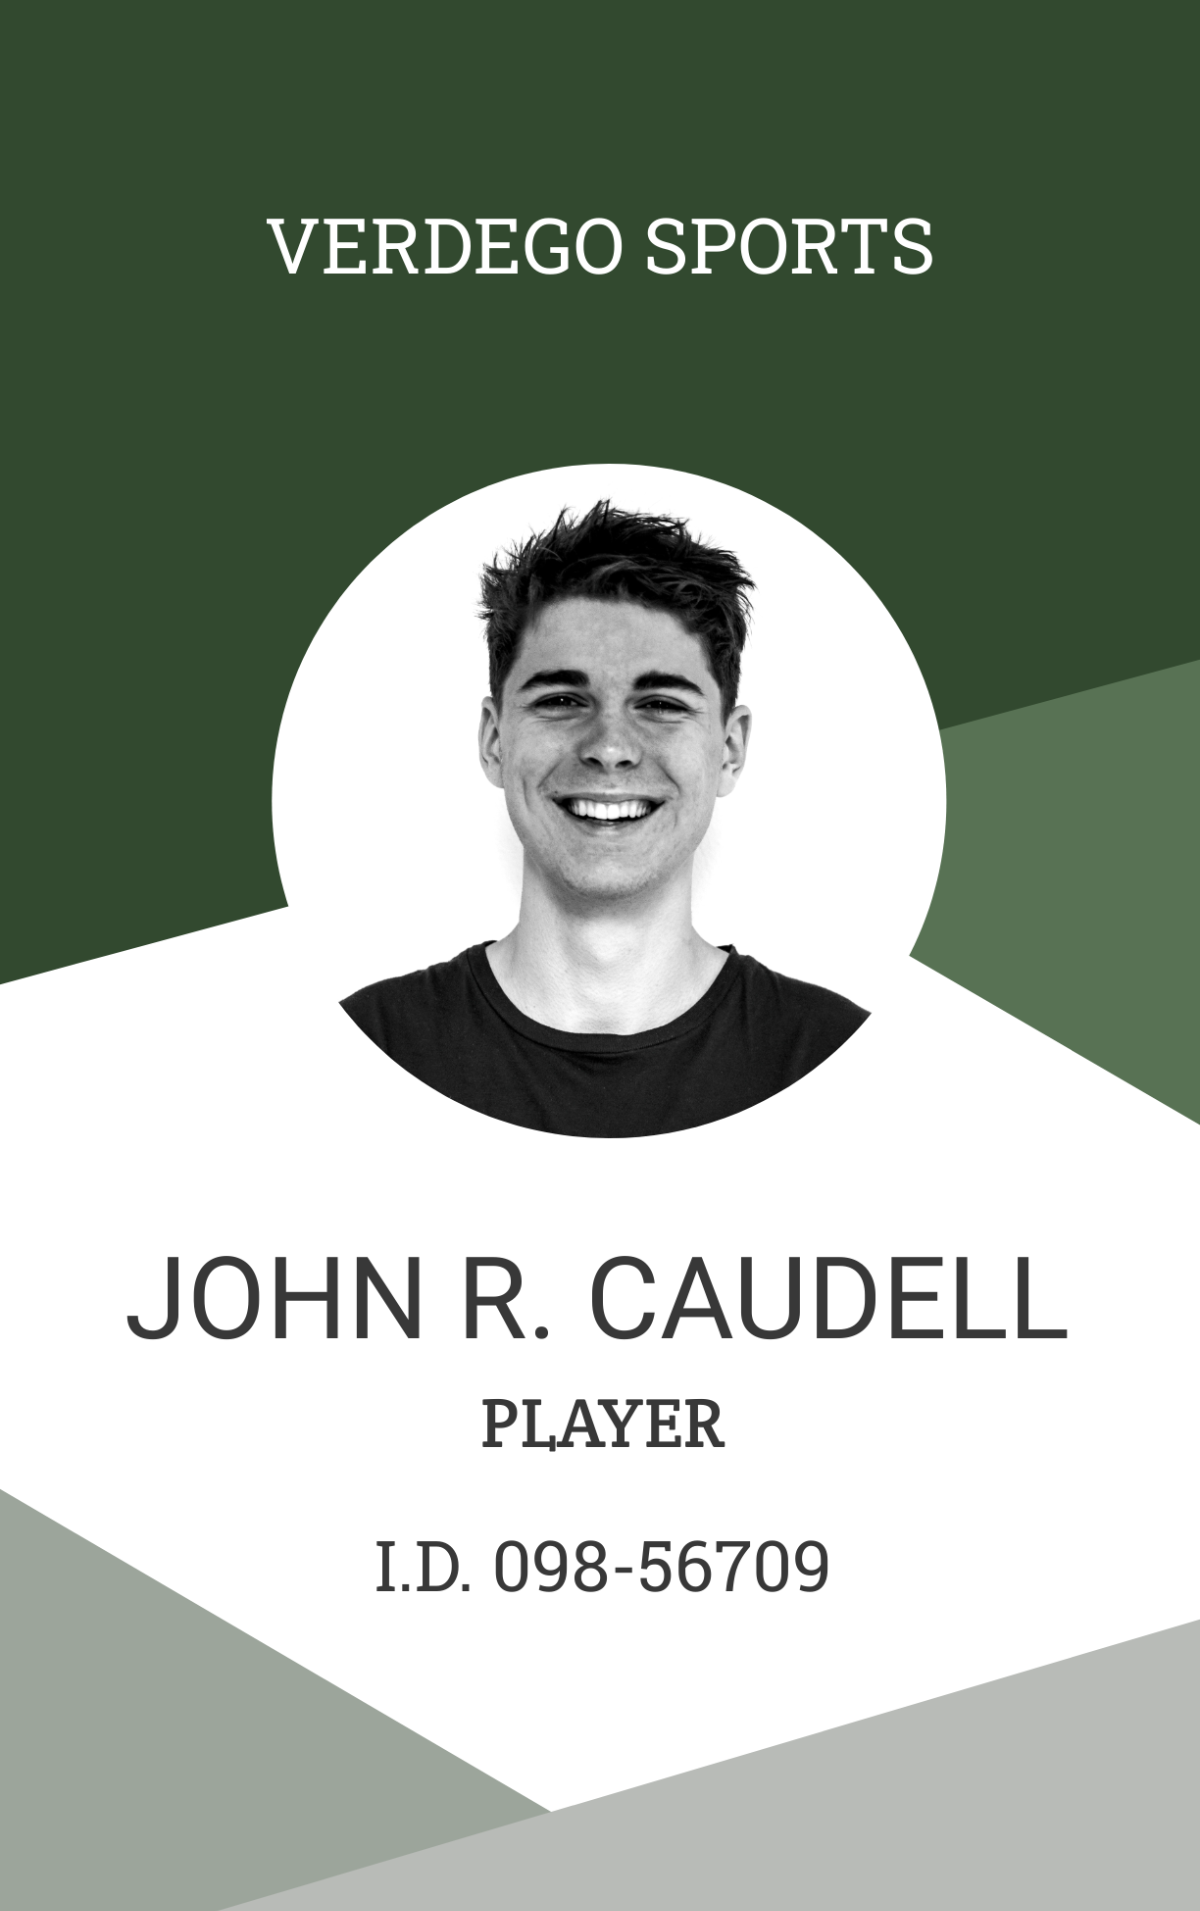 Free Player ID Card Template